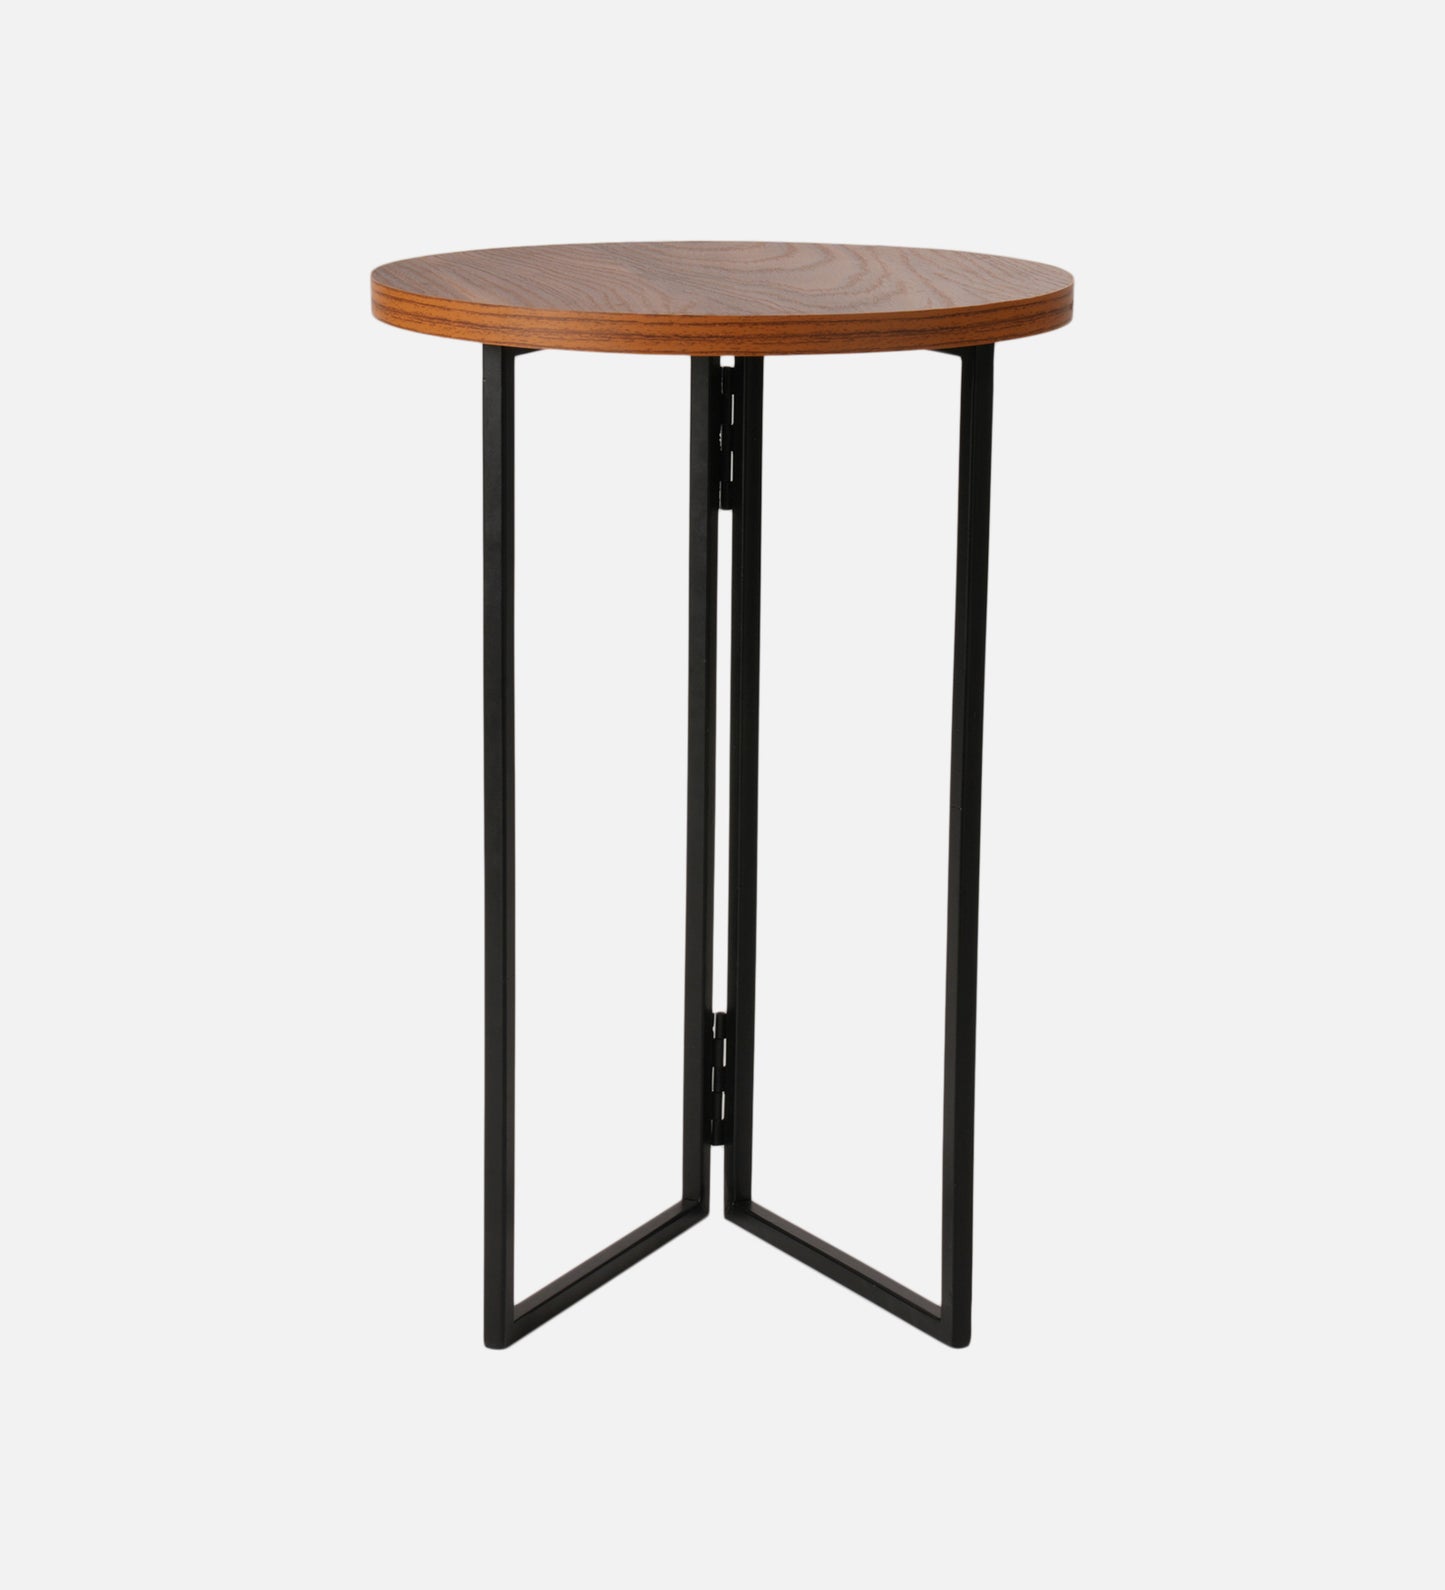 Teak Hues (Charcoal Legs) Round Oblique Side Tables, Wooden Tables, Living Room Decor by A Tiny Mistake